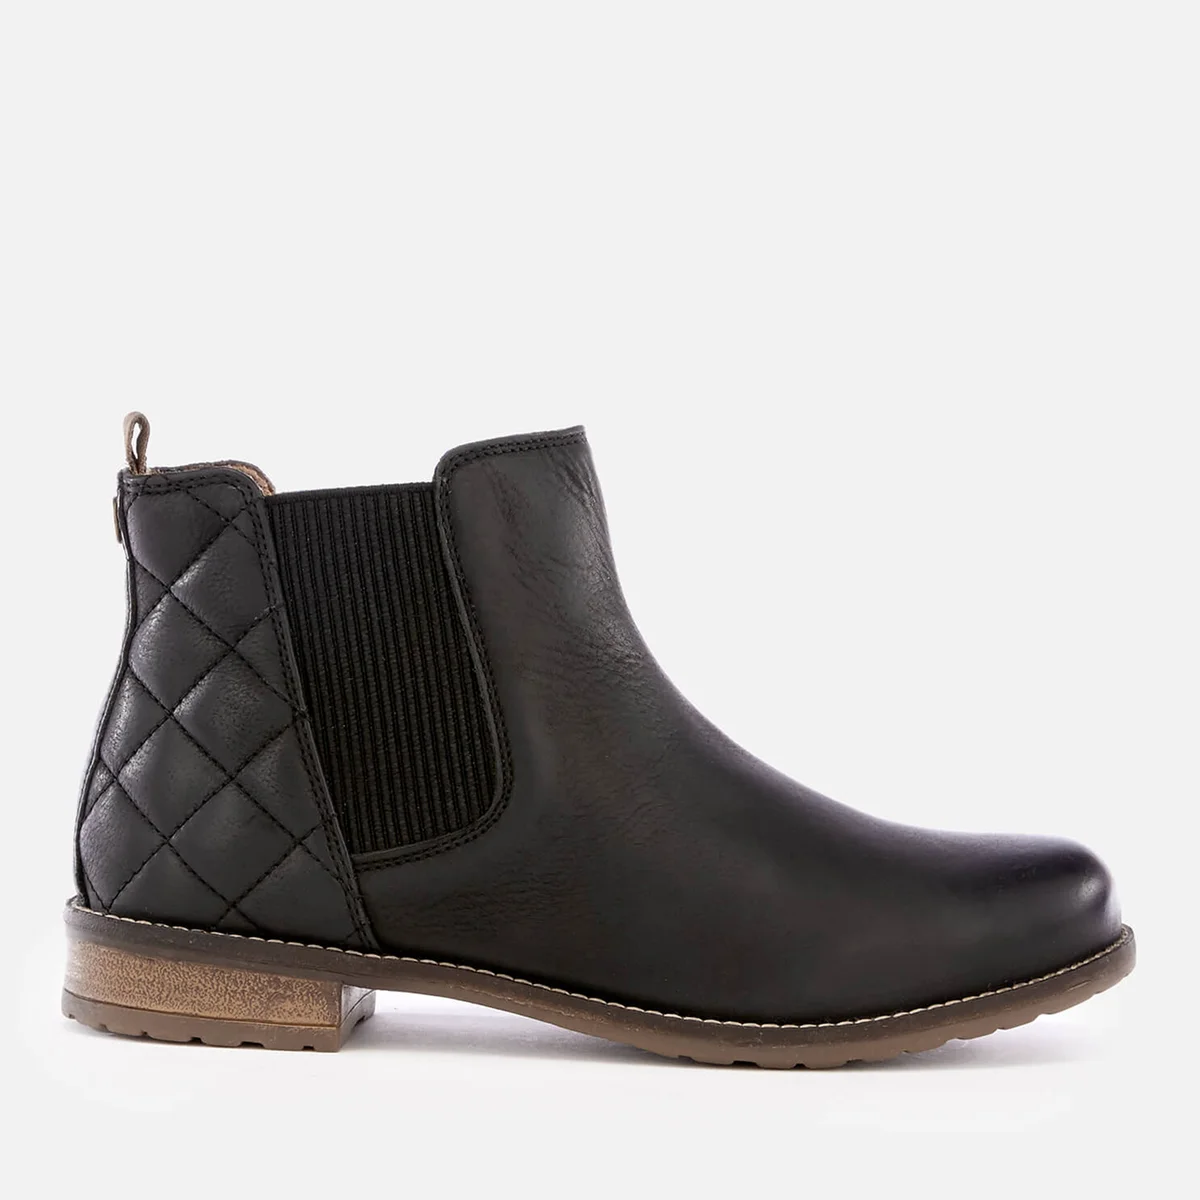 Barbour Women's Abigail Leather Quilted Chelsea Boots - Black Image 1